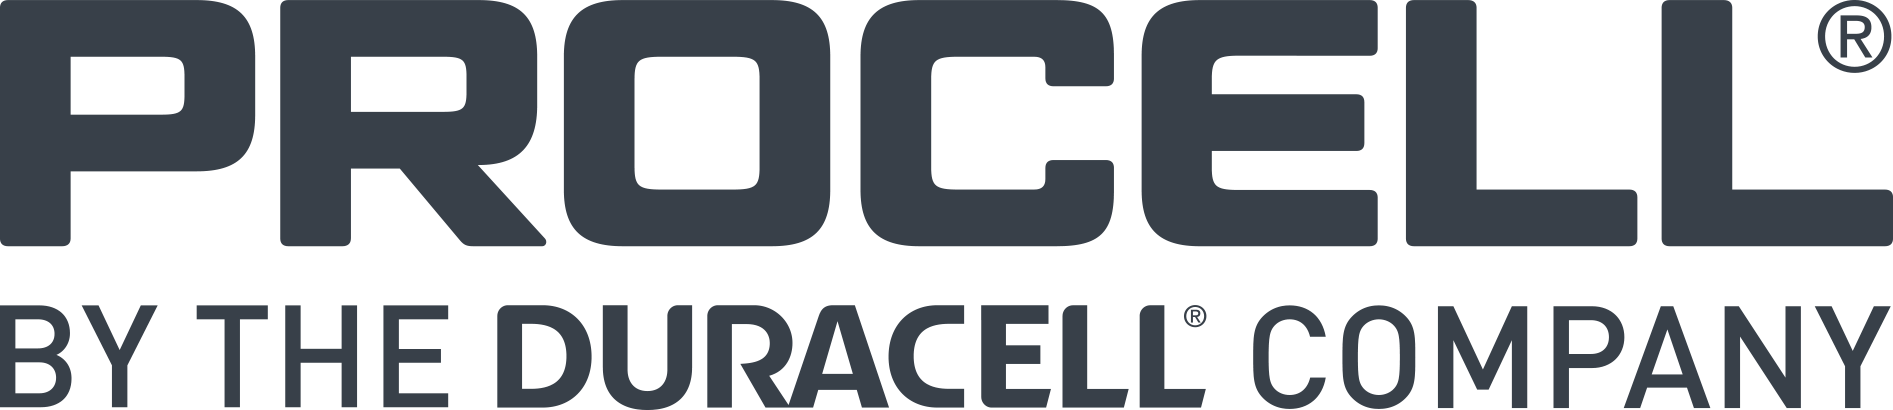 Logo exposant PROCELL BY THE DURACELL COMPANY